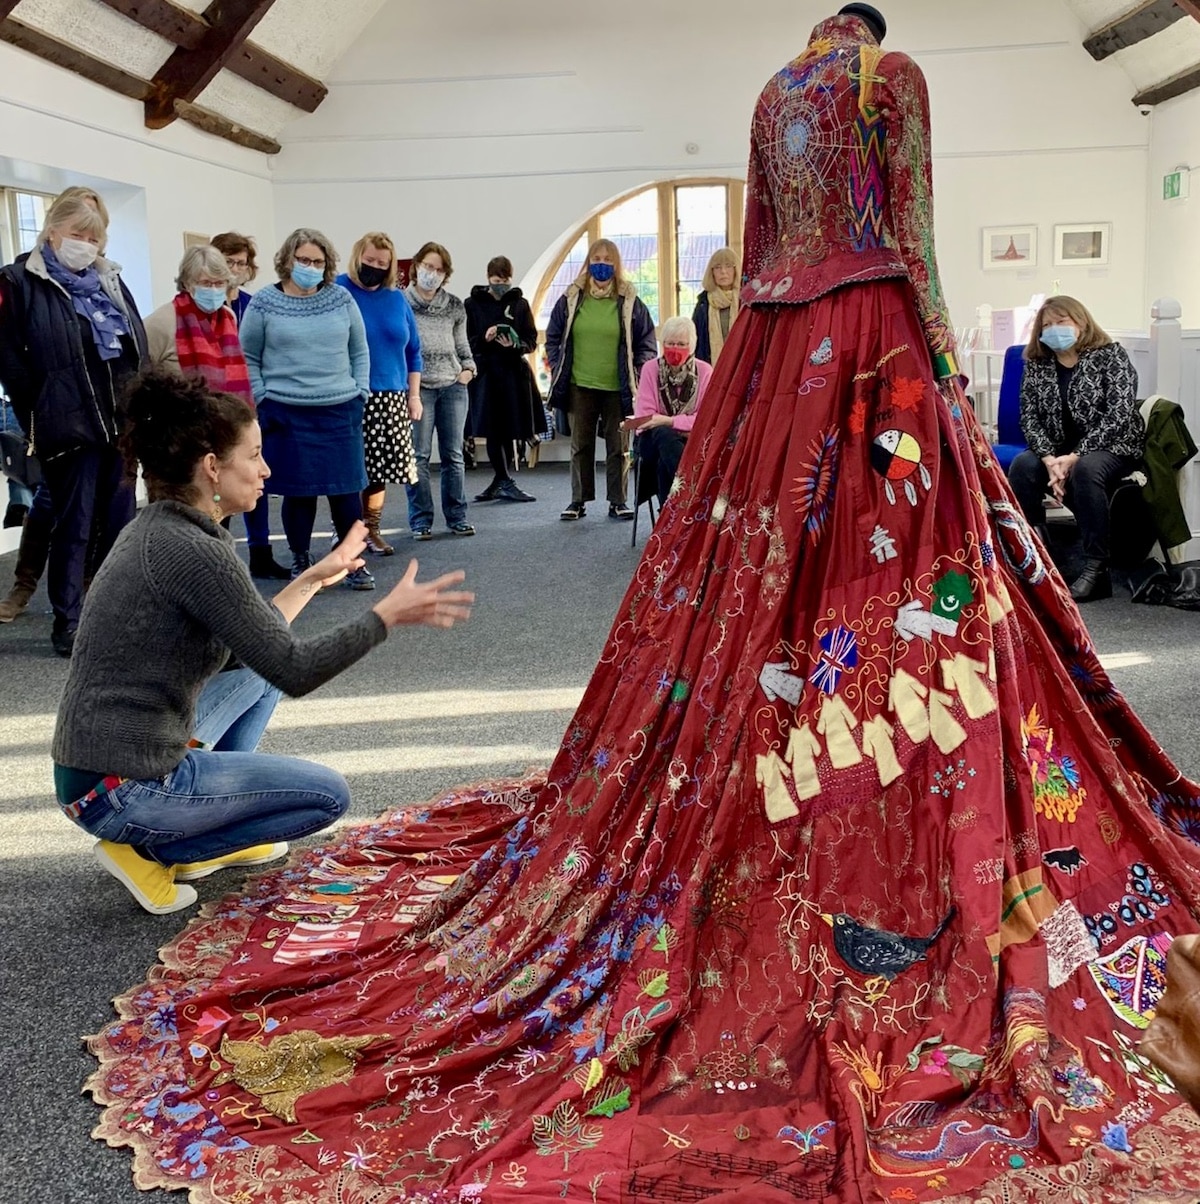 This ornate red dress took 13 years and 353 artists in the making